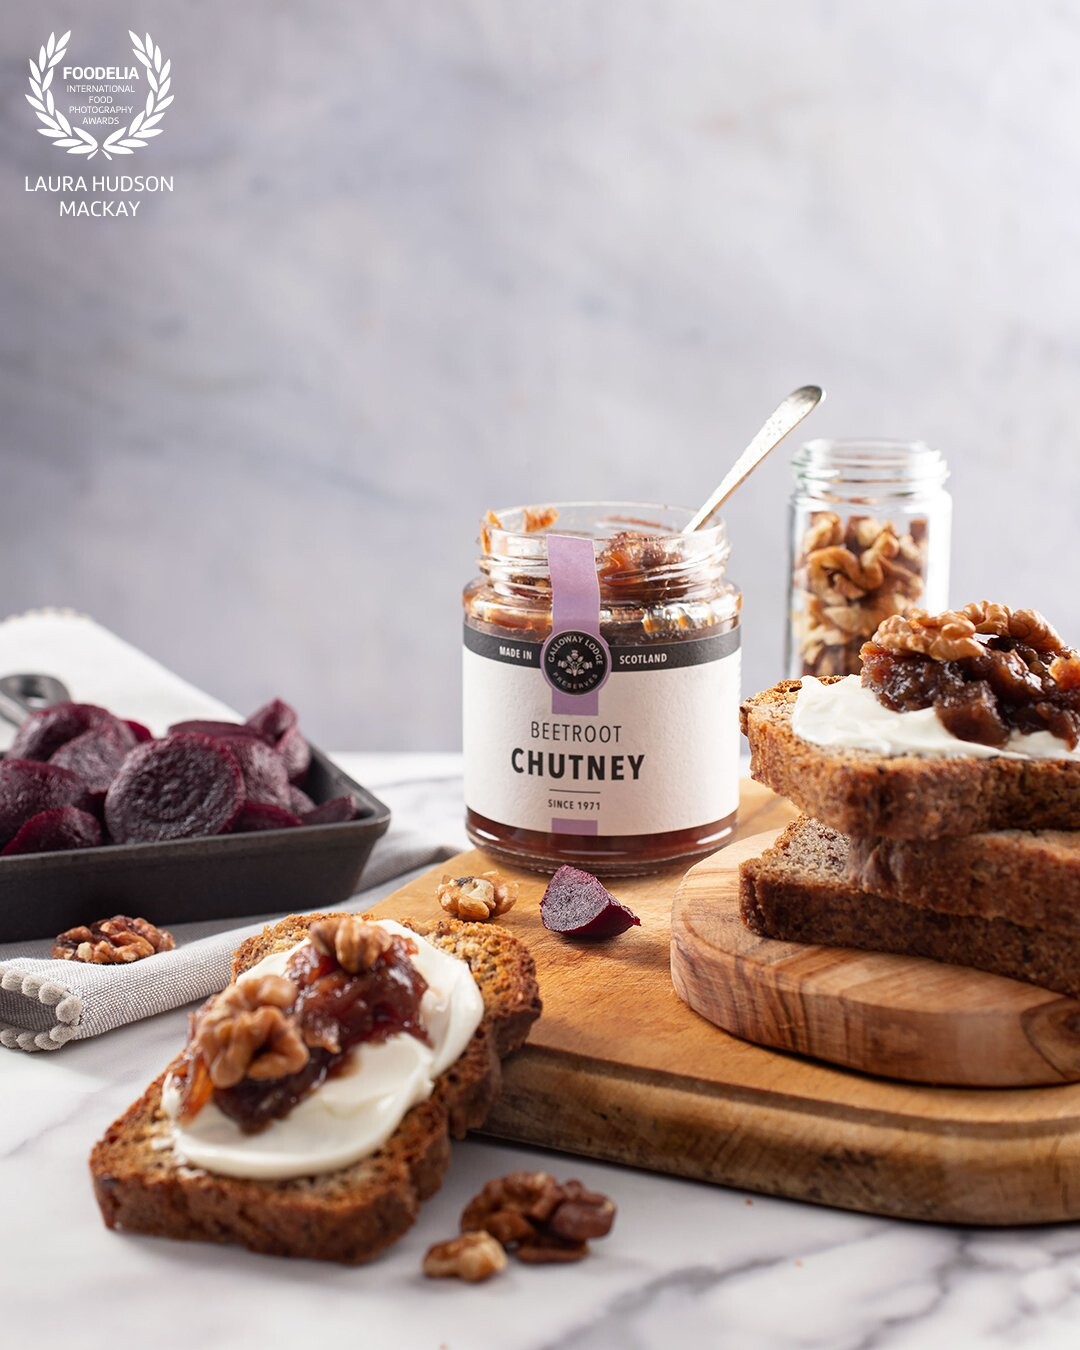 I have the pleasure to style and shoot for award winning Preserves and Condiments Producer, Galloway Lodge. I chose muted colour for the surface, backdrop and fabrics for this product, which makes the beetroot chutney POP! It’s delicious by the way!